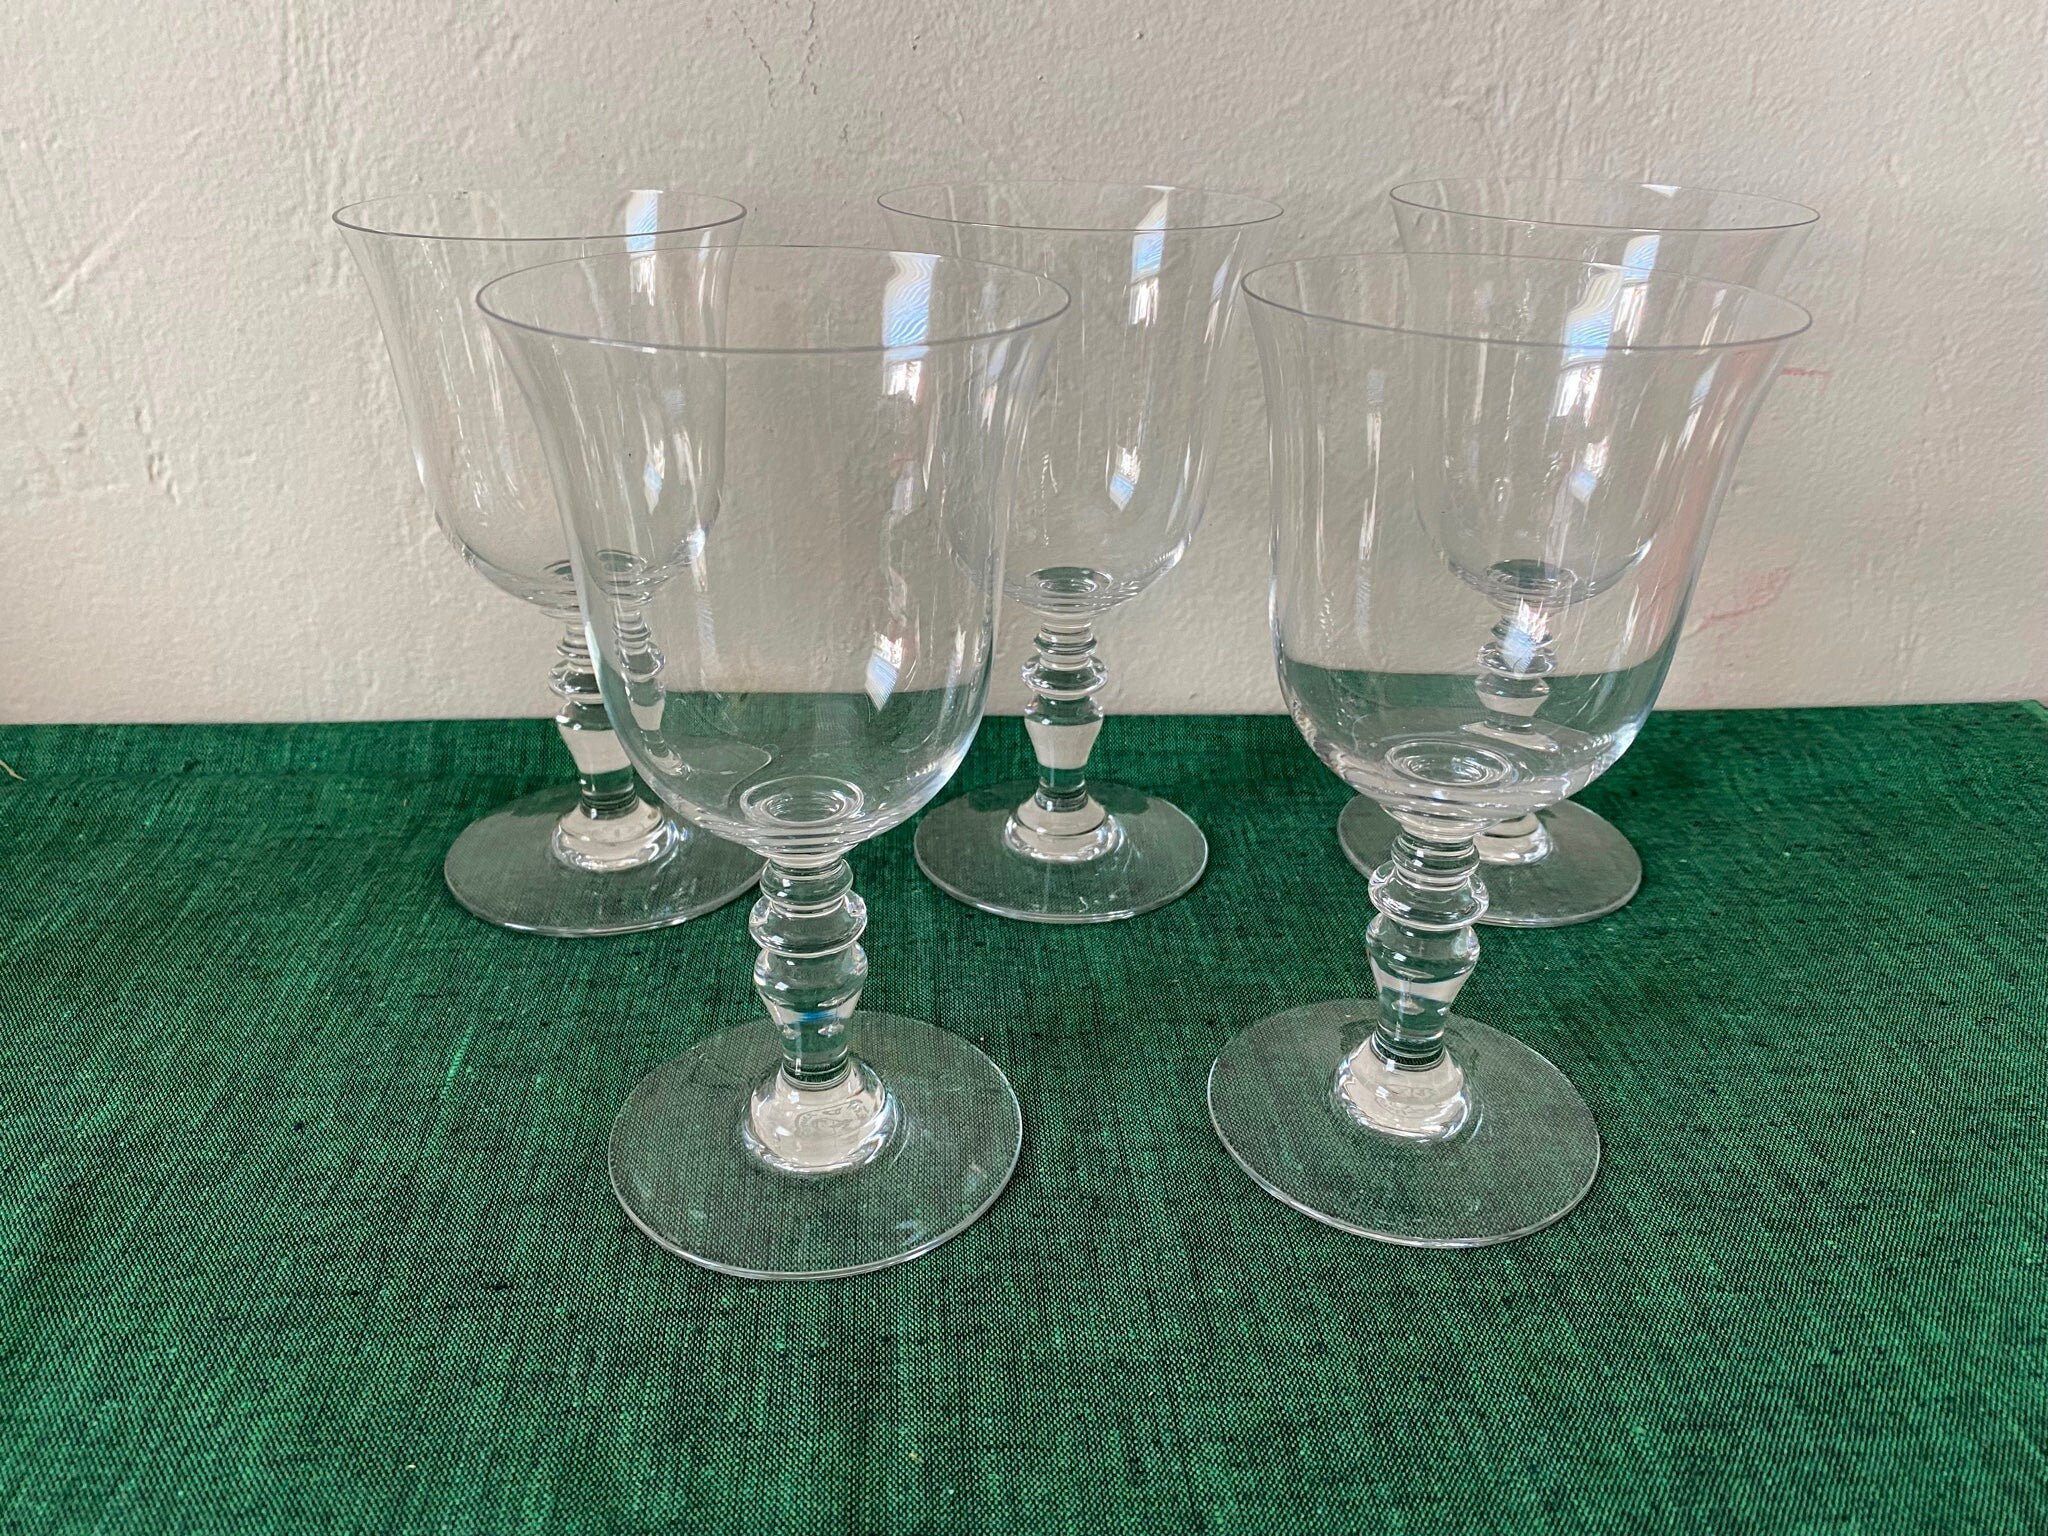 Baccarat wine glasses set of 12 for $850 8 inches tall 3 1/2 inch